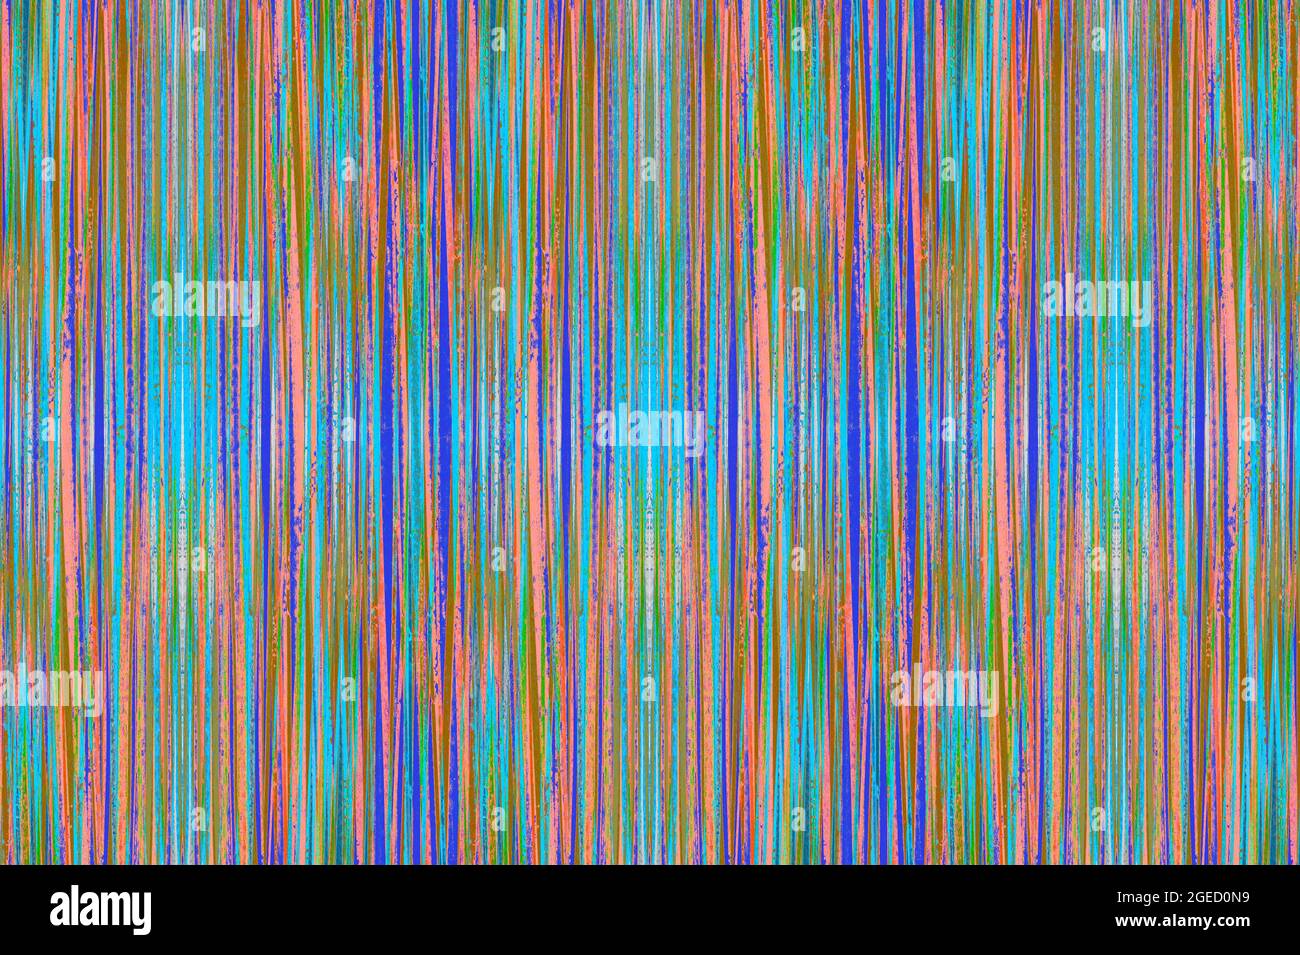 Colorful Abstract Striped Pattern Background Stock Photo